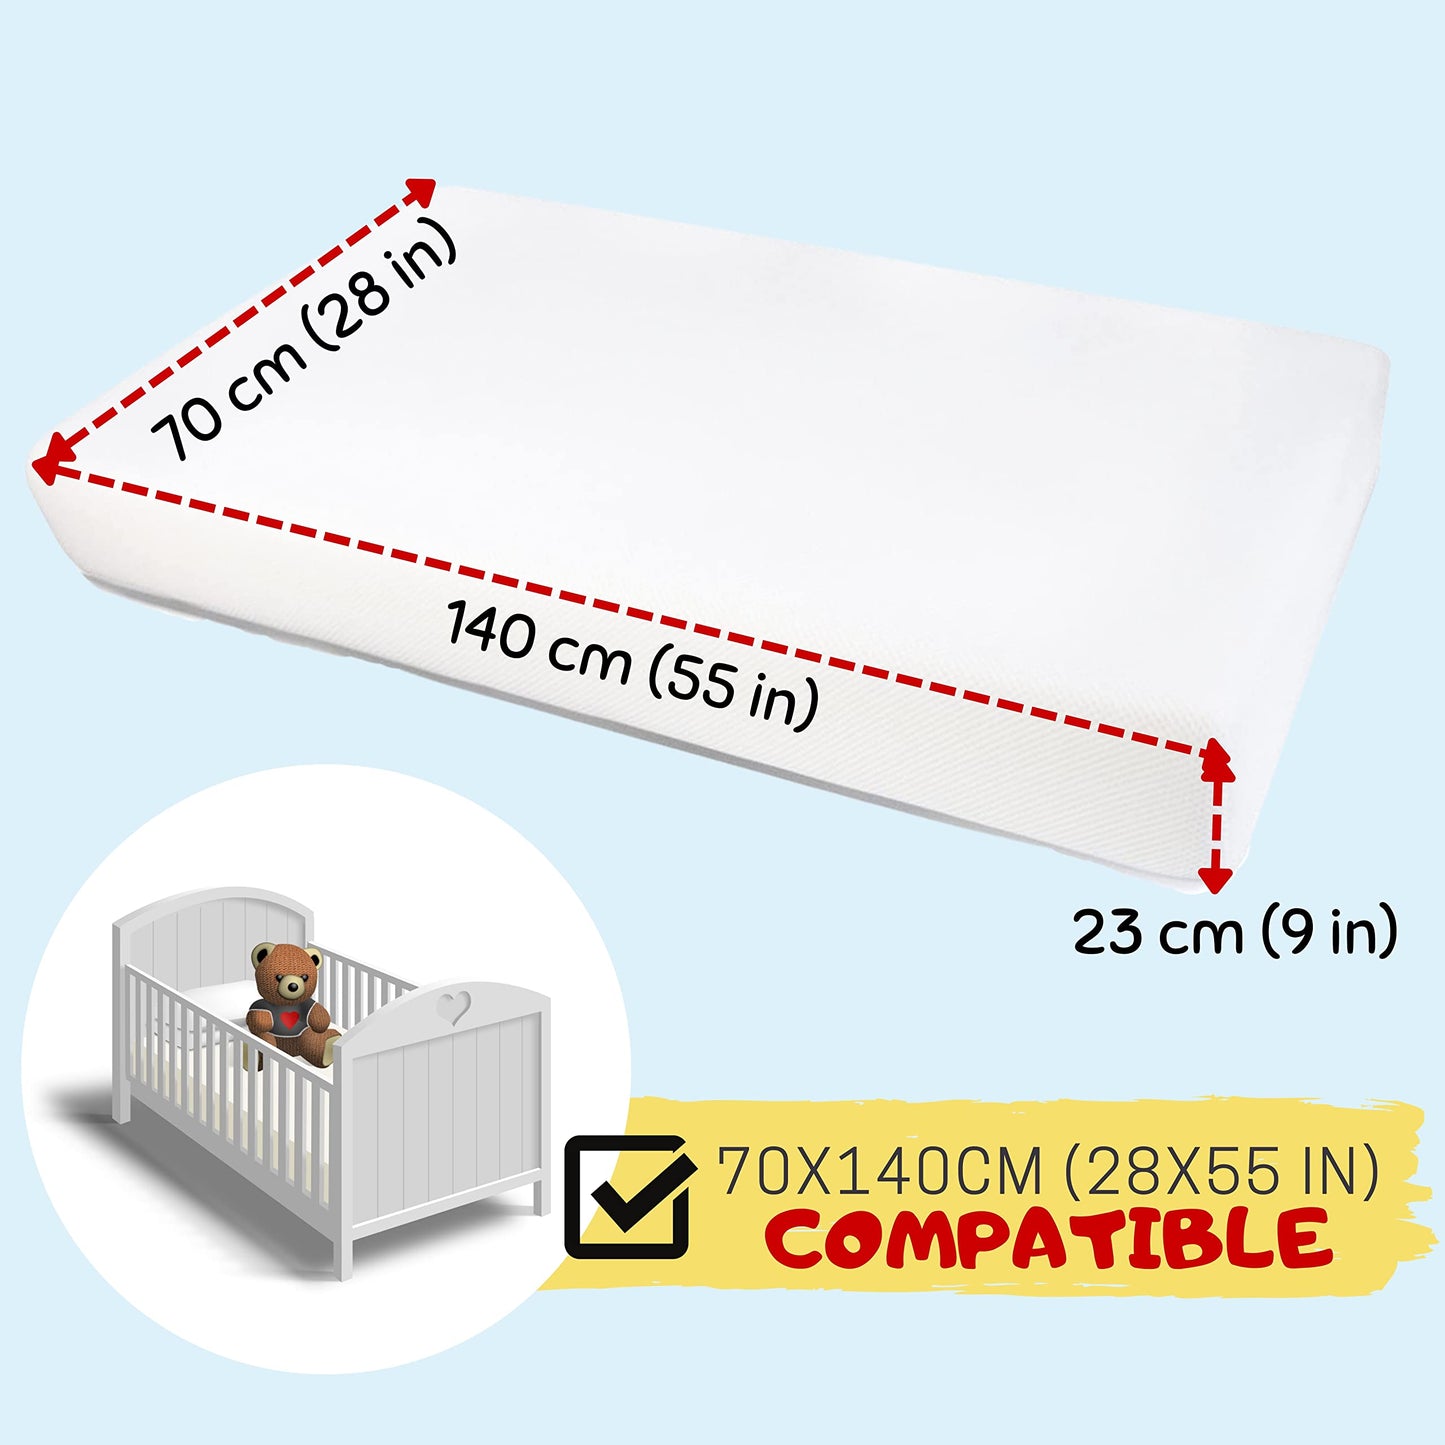 Bisoo Baby Cot Bed Waterproof Sheets Fitted 140 x 70 / 28x55 - Set of 2 Fitted Sheet Mattress Protector Made of 100% Jersey Oeko-Tex + PU - Toddler Cots Beds & Cribs - Soft & Silent - White & Gray